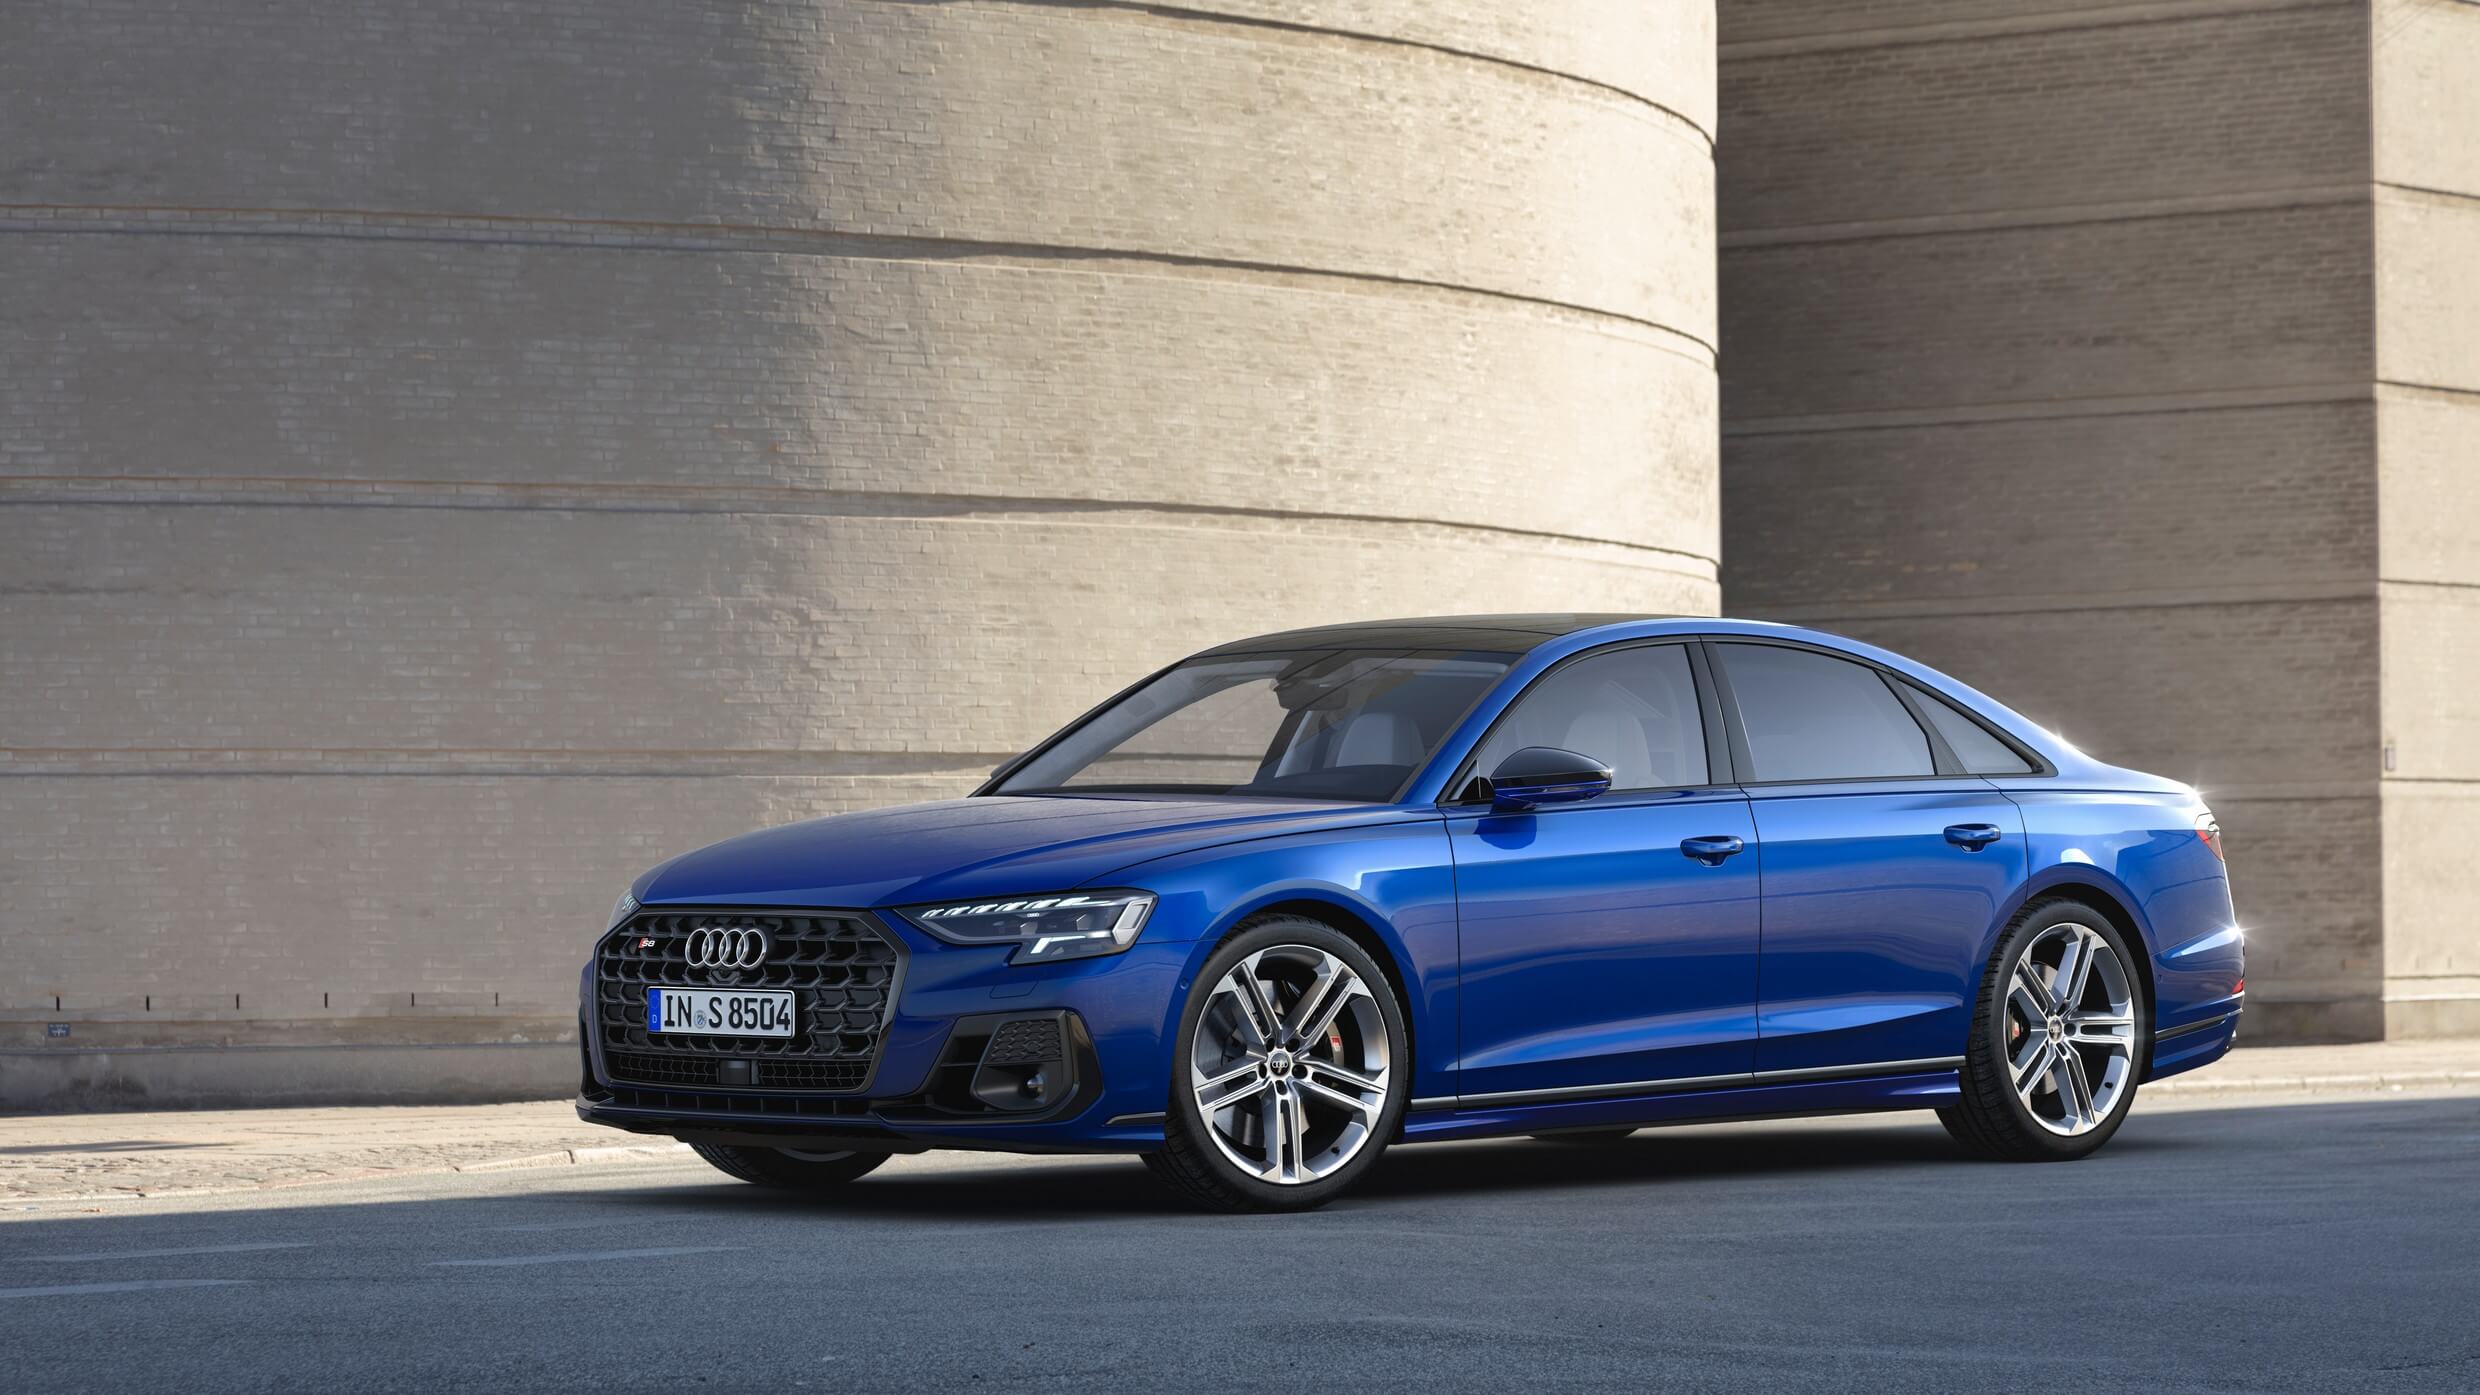 2022 Audi S8 revealed with sporty front grille design and new lights